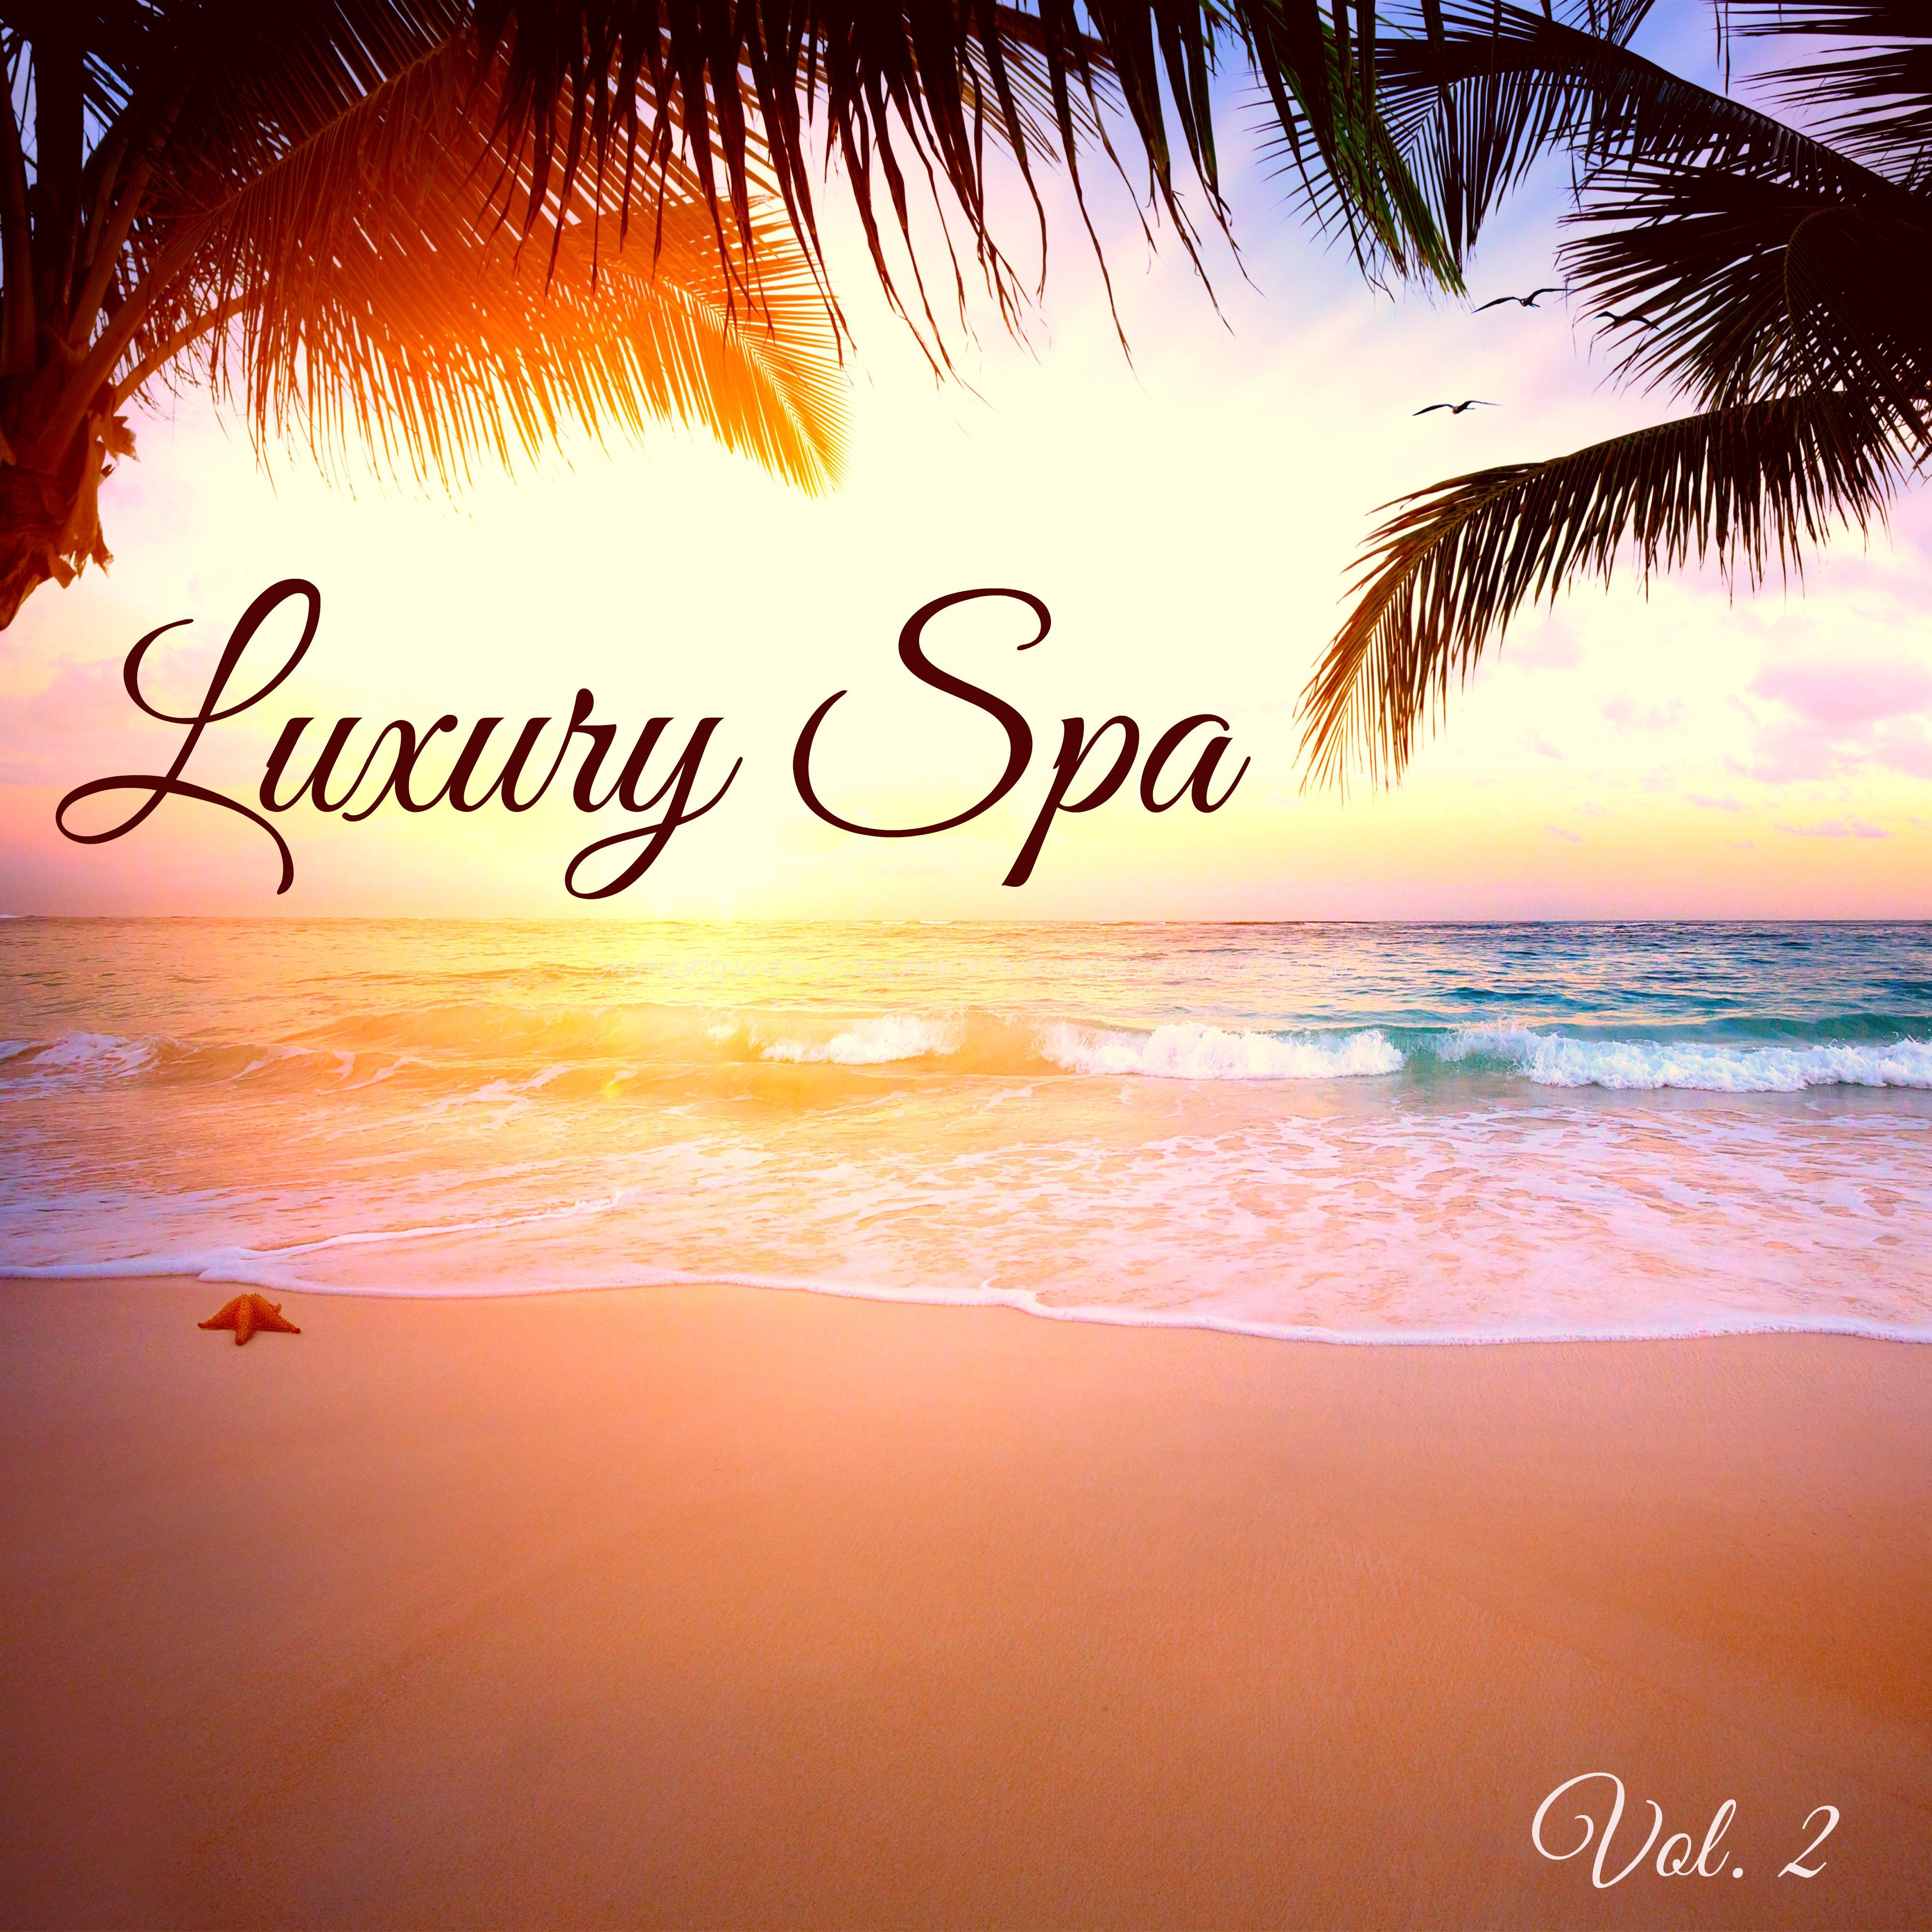 Luxury Spa, Vol. 2  Background Instrumental Music for Massage, Relaxation, Sauna and Spa Treatments